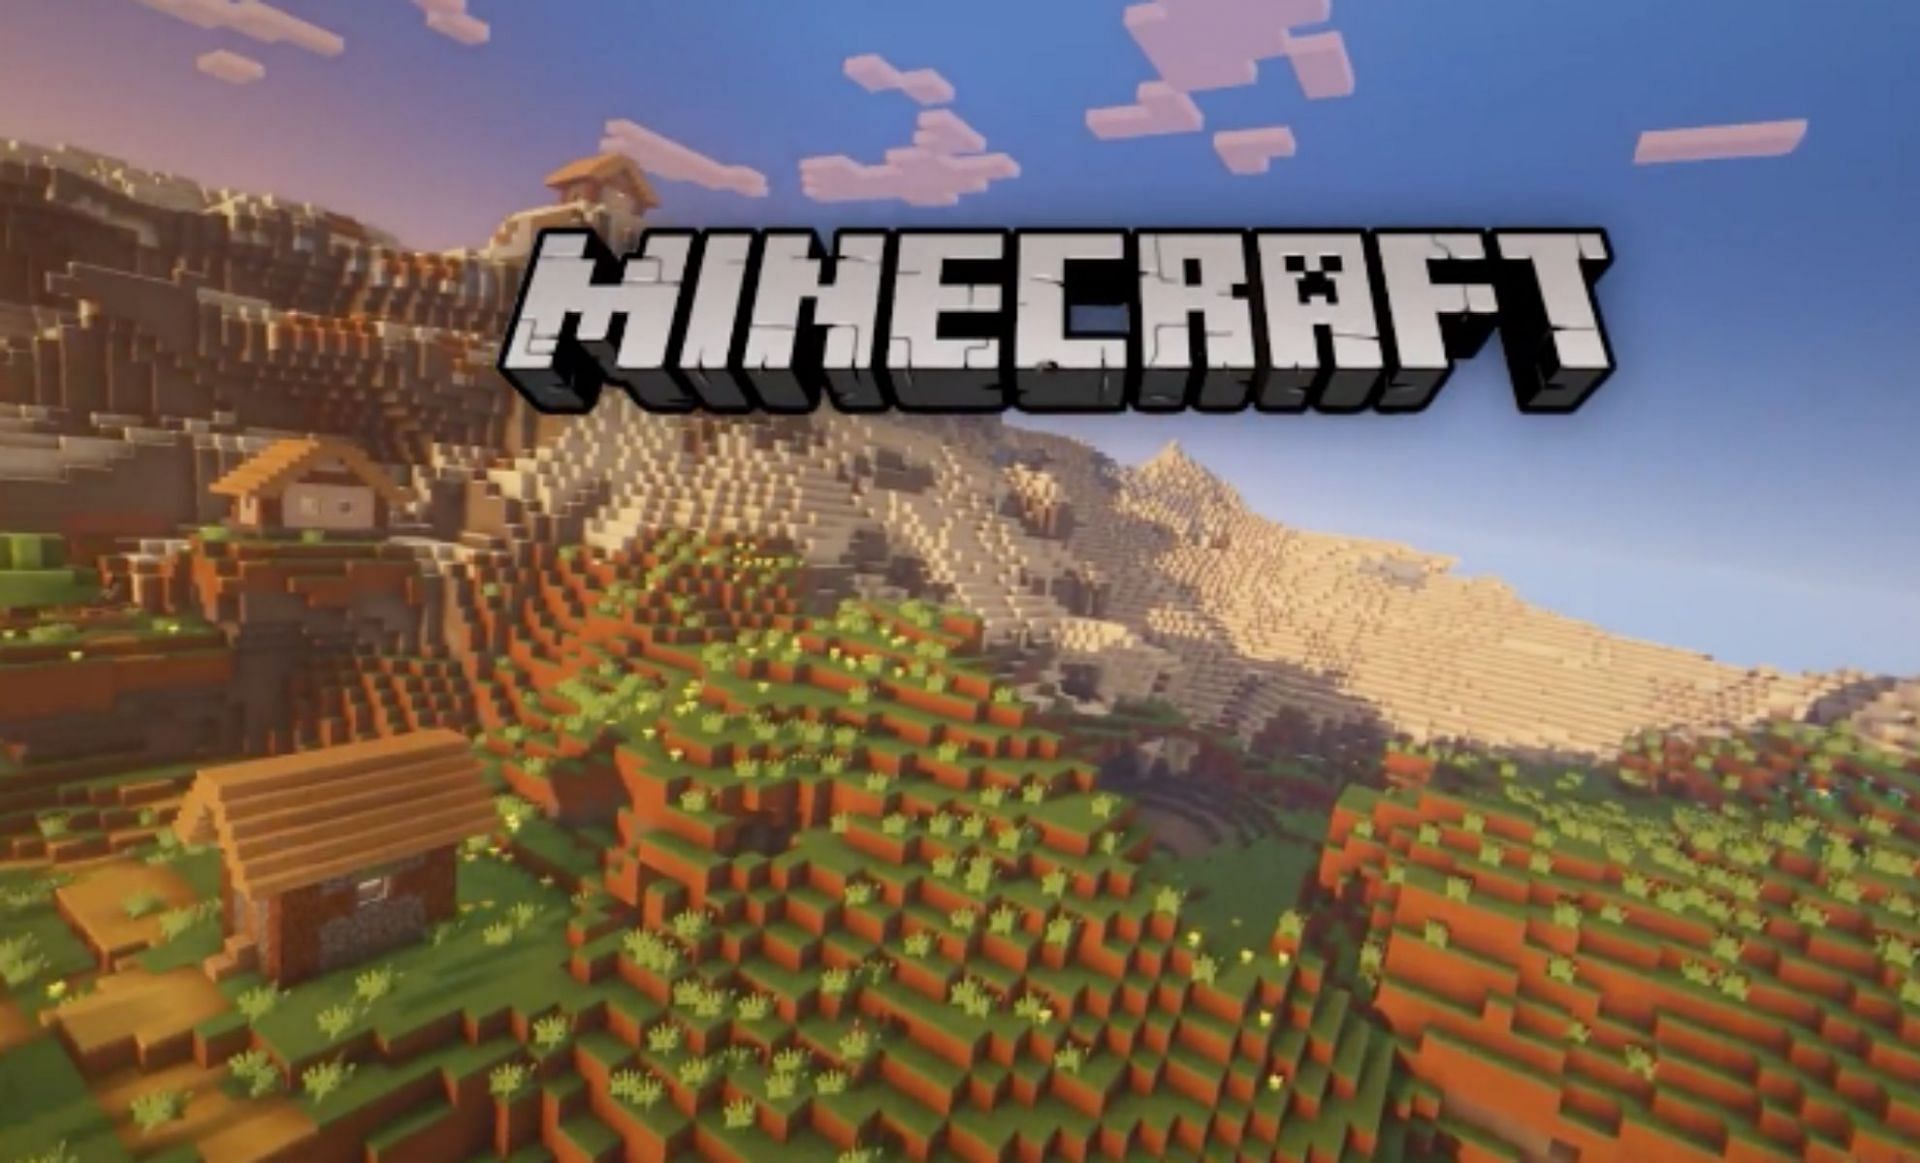 Seed of Minecraft's classic title screen discovered